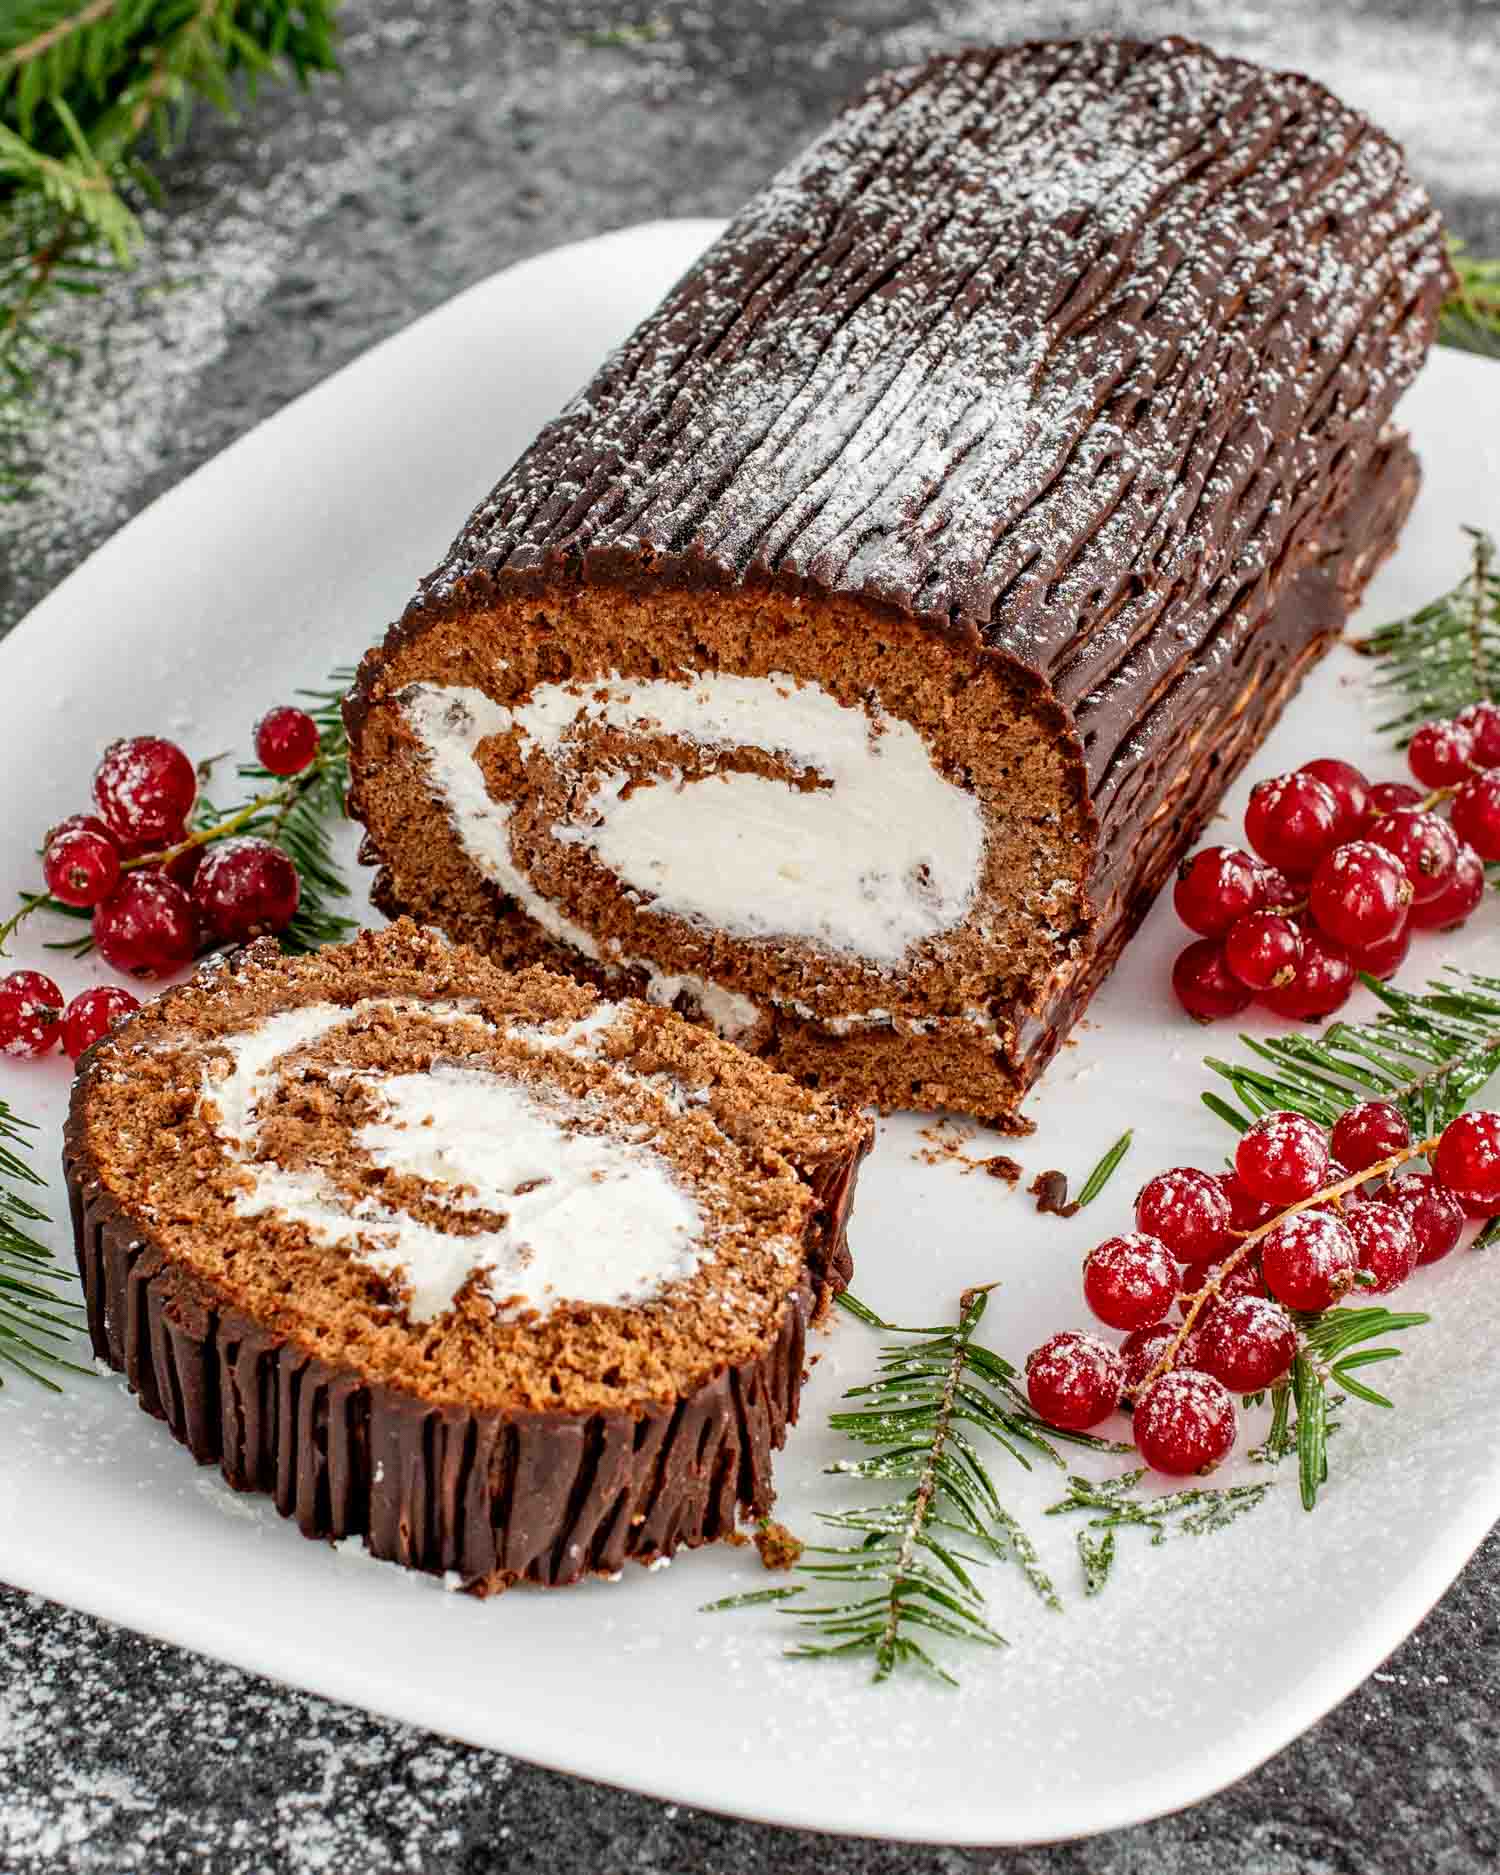 a buche de noel (yule log cake) on a white cake platter, with one slice cut out.